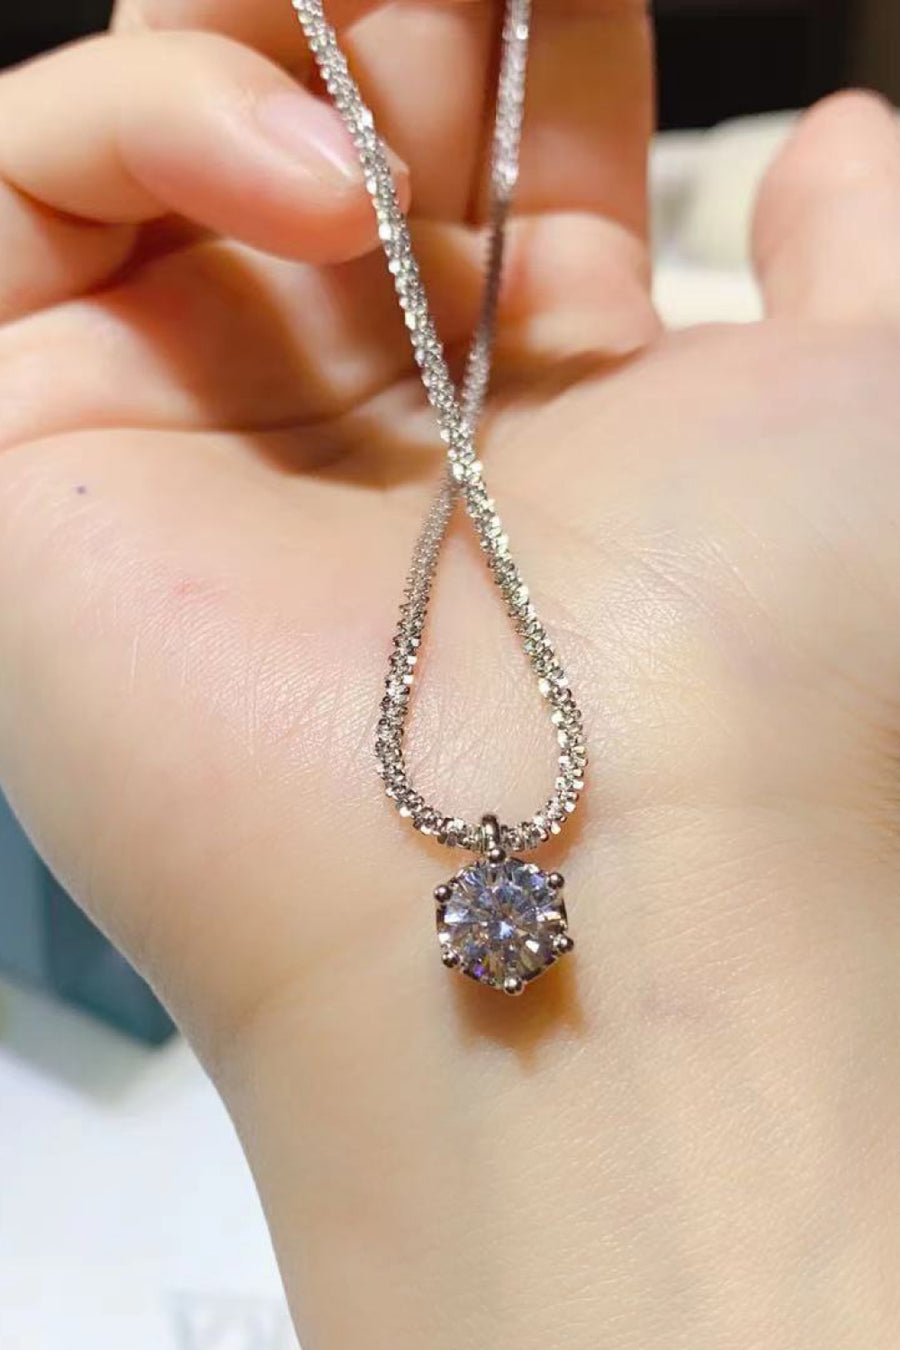 1 Carat Moissanite Necklace, 925 Sterling Silver Necklace, Moissanite Pendant, Solitaire Necklace, Gemstone Necklace, Ethical Jewelry, Luxurious Silver Necklace, Elegant Moissanite Jewelry, Timeless Necklace Design, Affordable Luxury